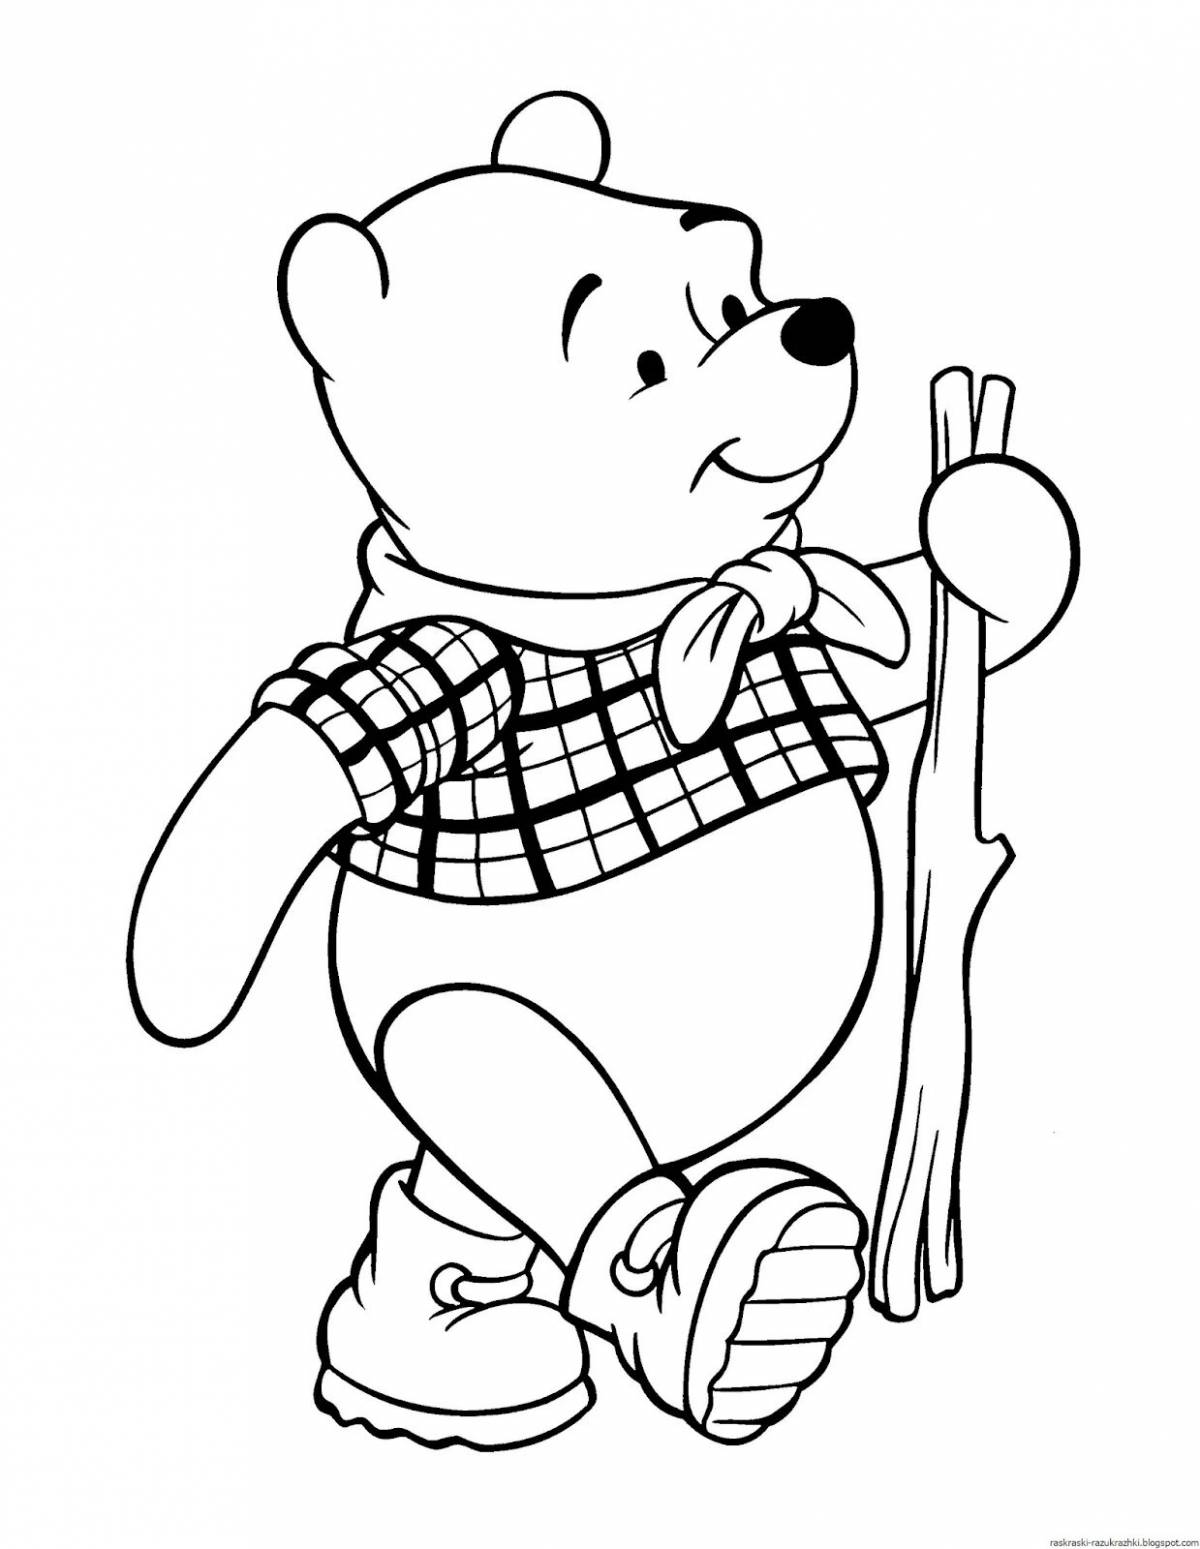 Winnie the pooh for kids #12